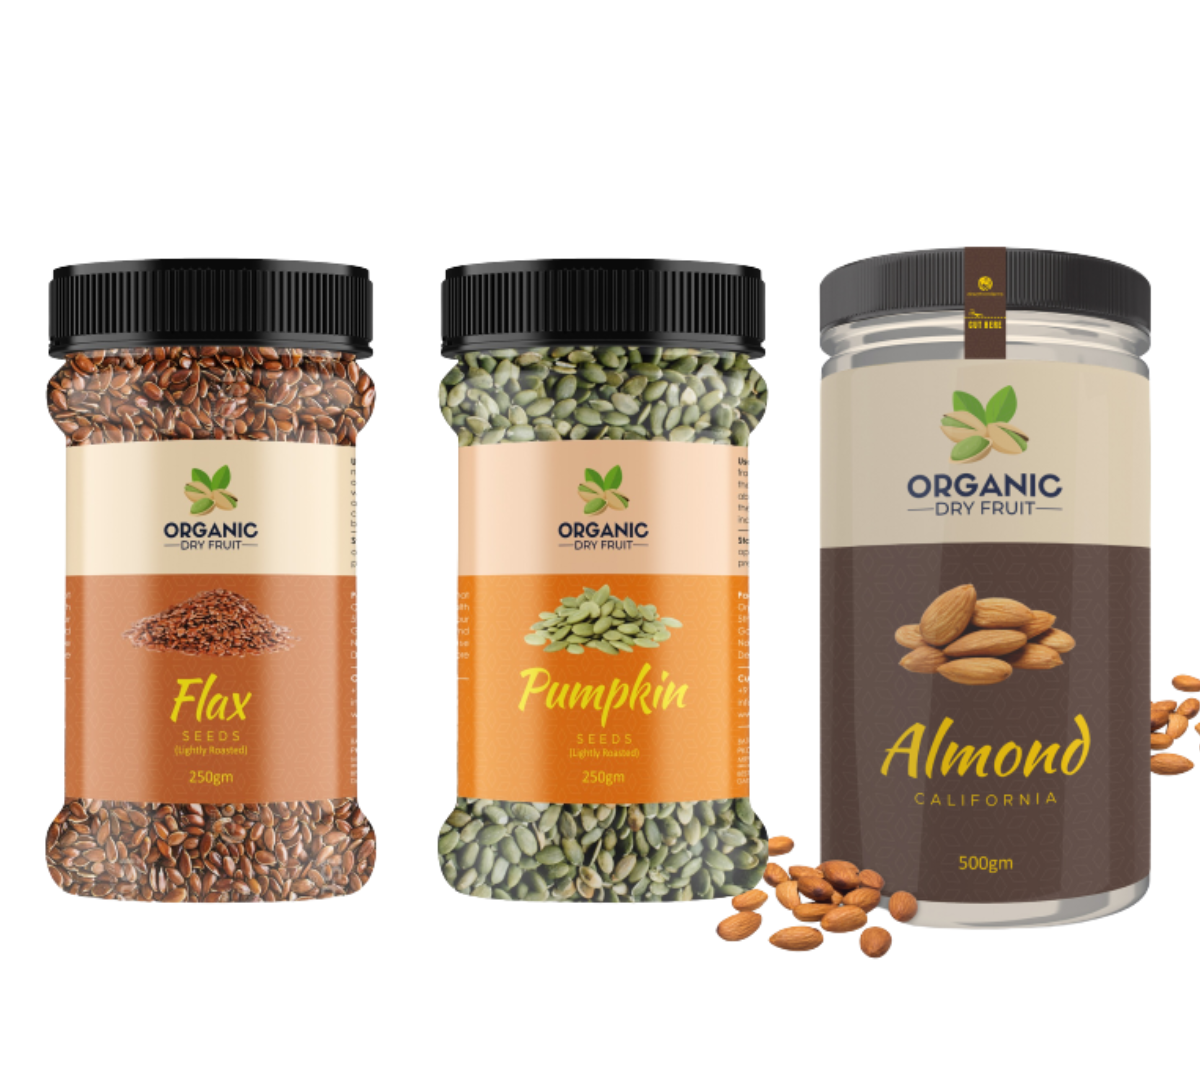 Organic dry fruit | premium dry fruit | best organic almonds | online dry fruits in india | Combo Pack Of 3 Almonds 500G Pumpkin 250G And Flax Seeds 250G